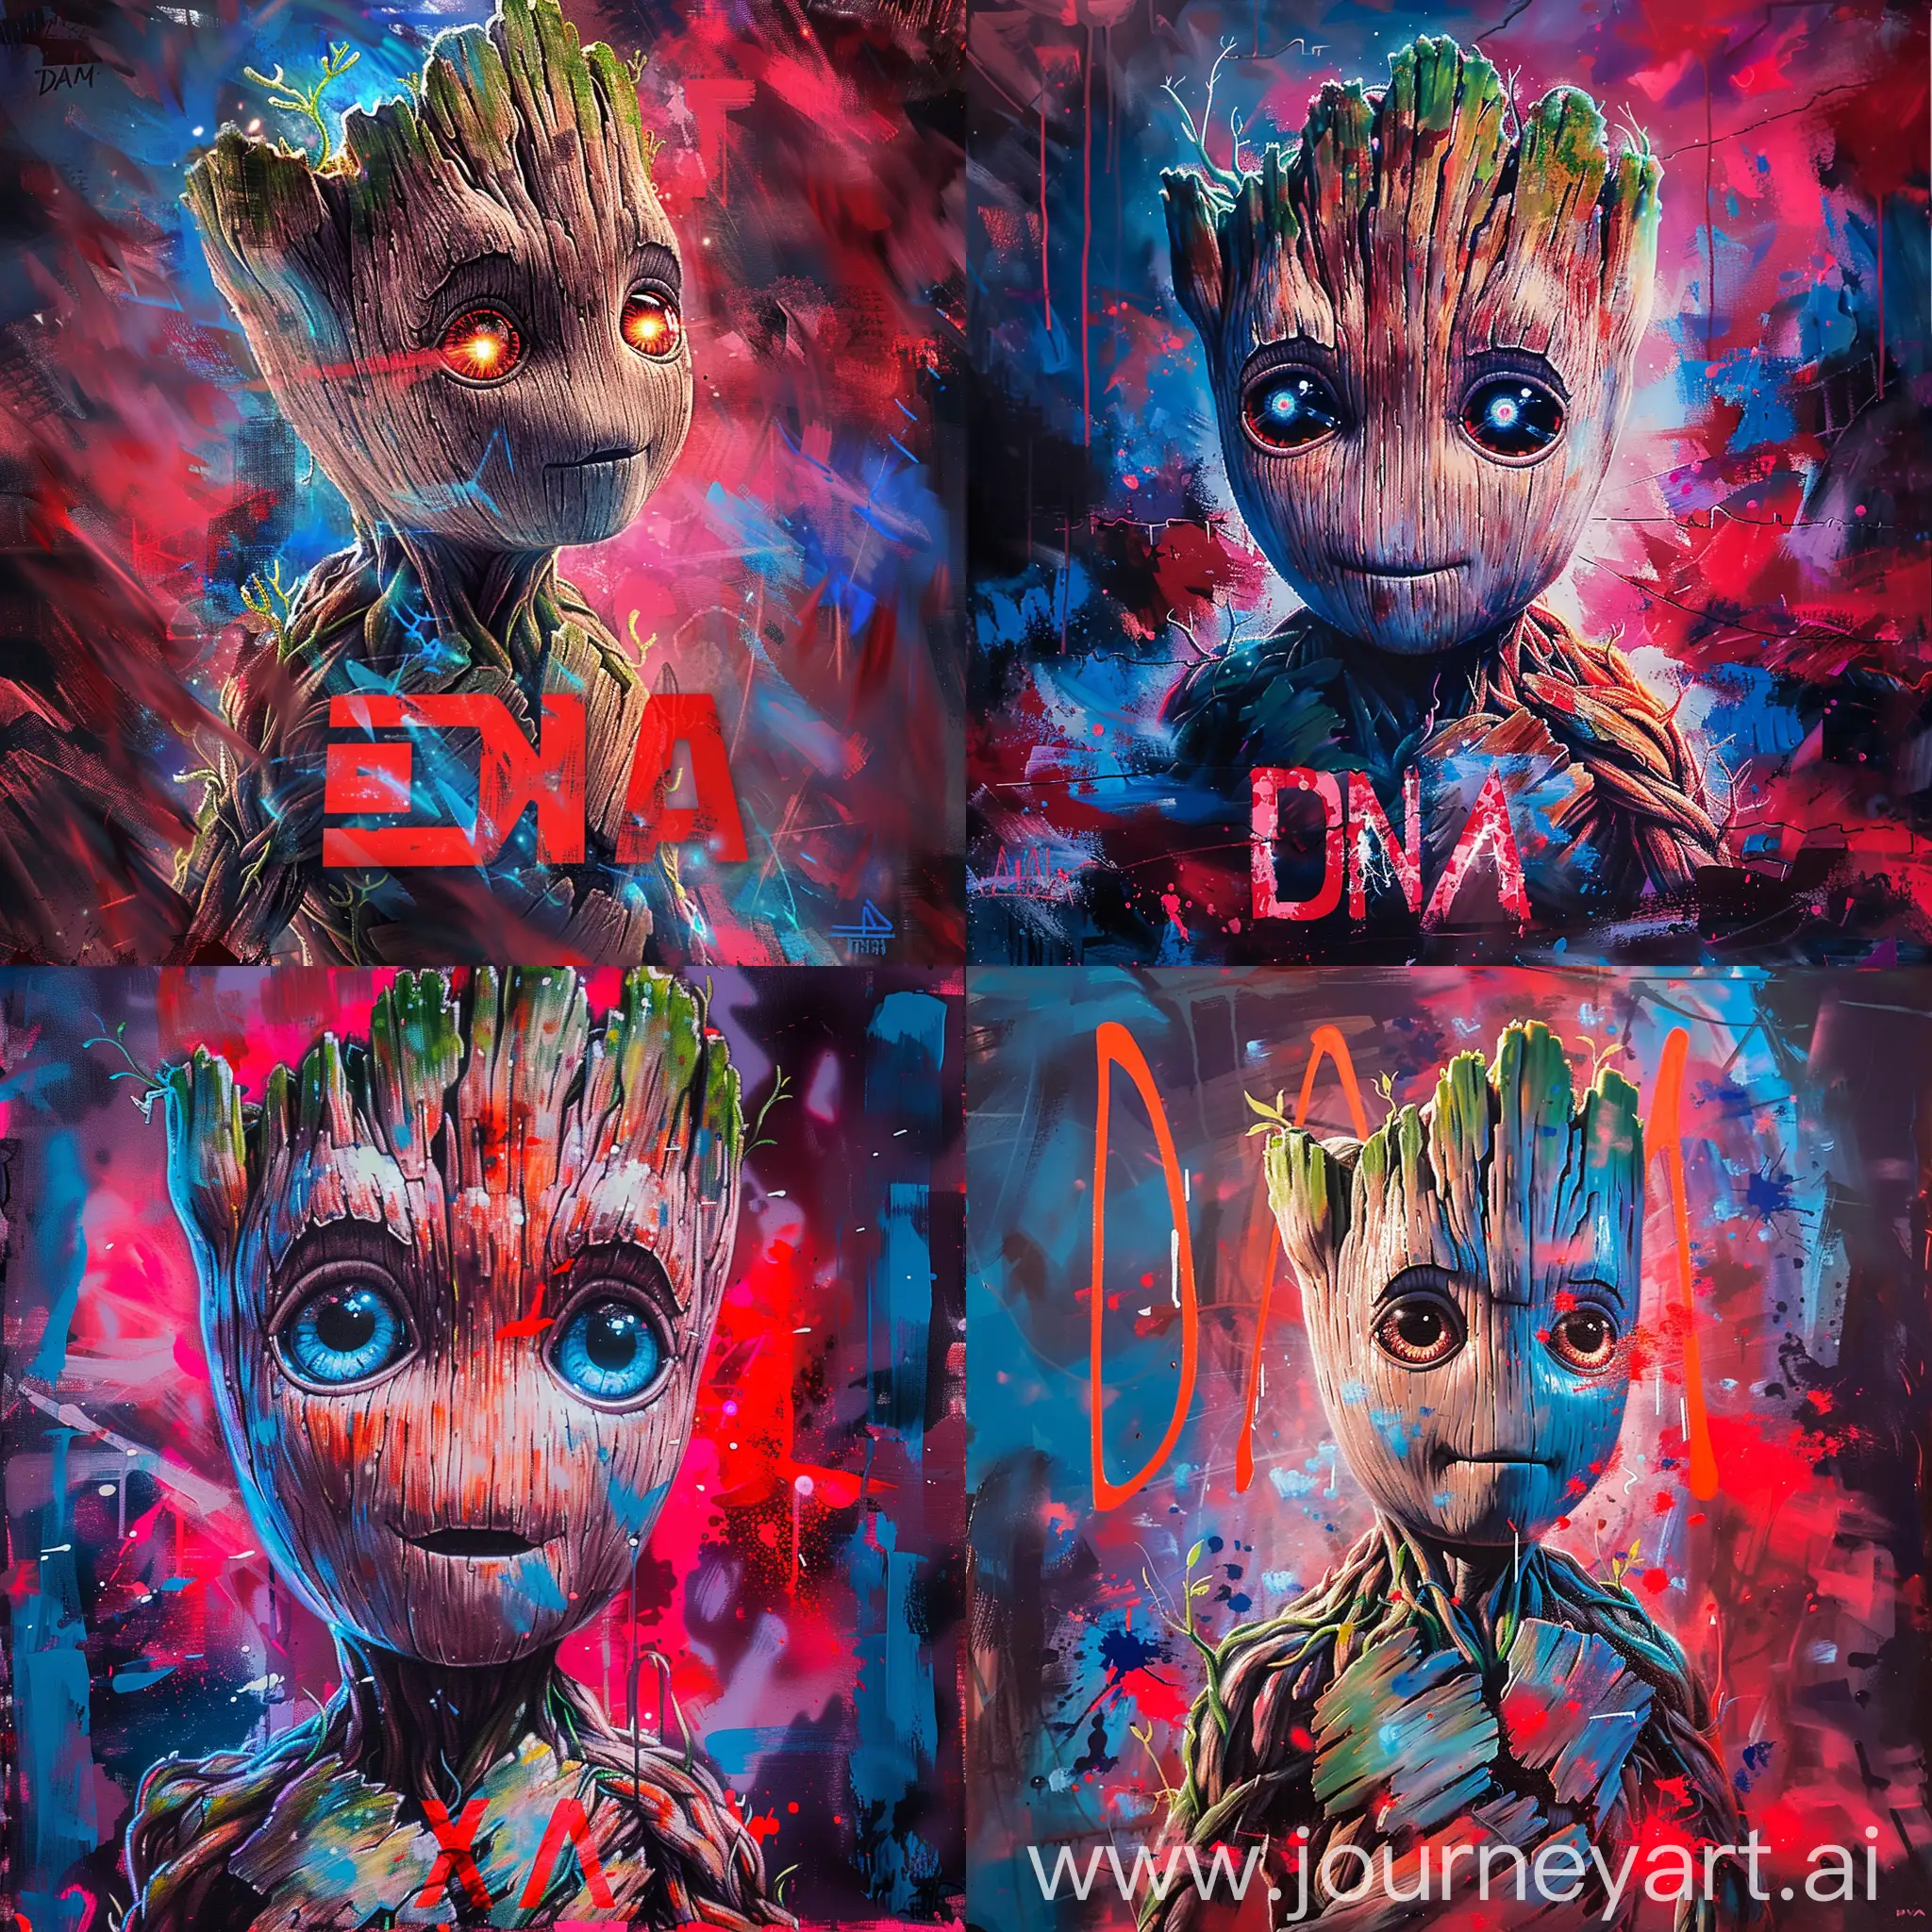 Create text that reads "DNA" with a stunning abstract painting featuring a baby groot with highly detailed and captivating glowing eyes

And that. The background is a beautiful mix of electric red, blue, pink and purple colors., vibrant, illustration, portrait photography, painting, fashion